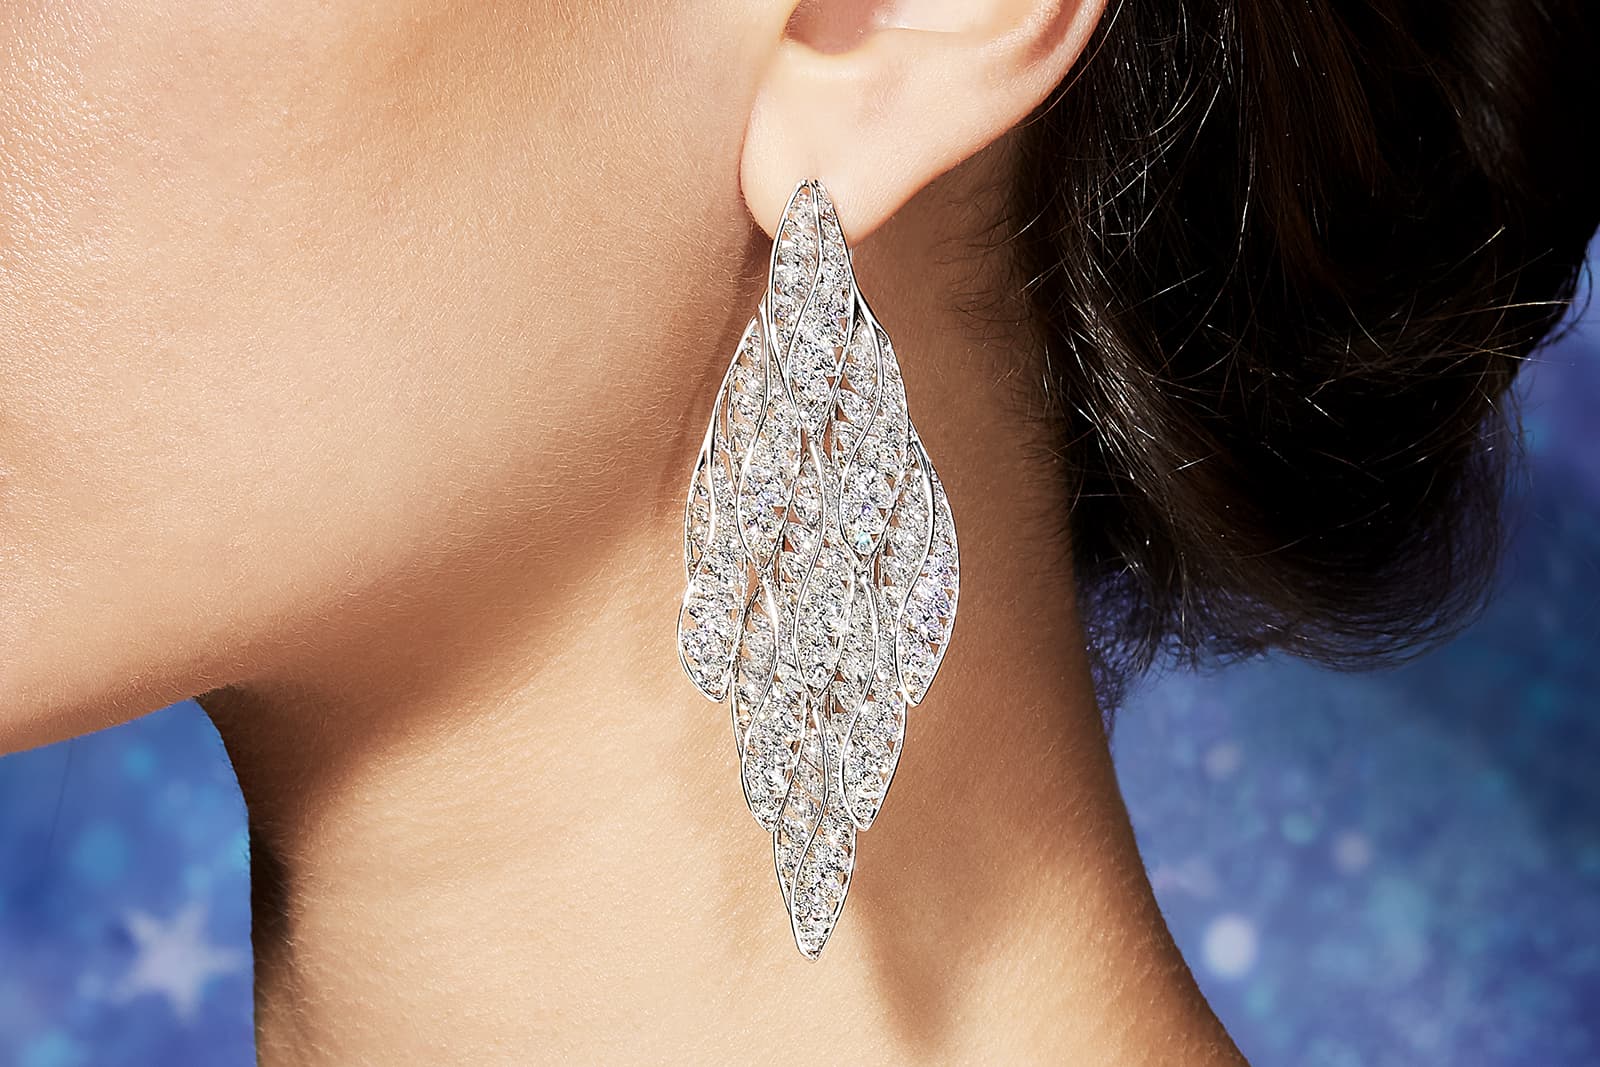 FORMS 'Helix' earrings with marquise diamonds in white gold